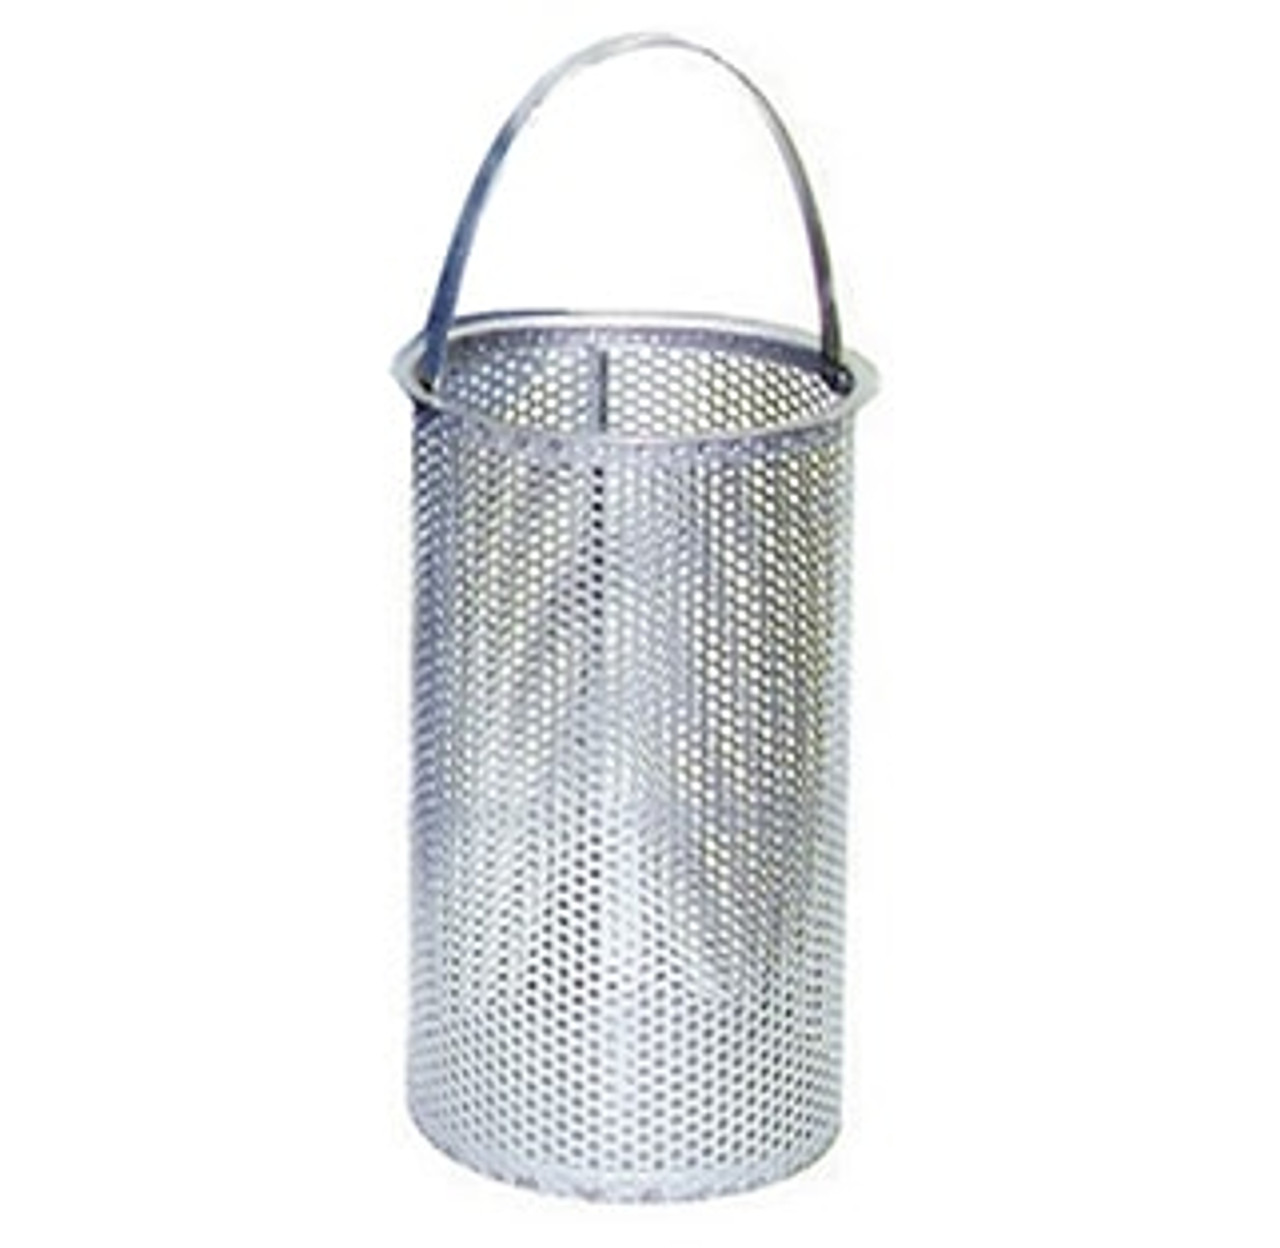 20 Mesh and 5/32" Perforation Replacement Basket for 6" Eaton Model 30R Strainer